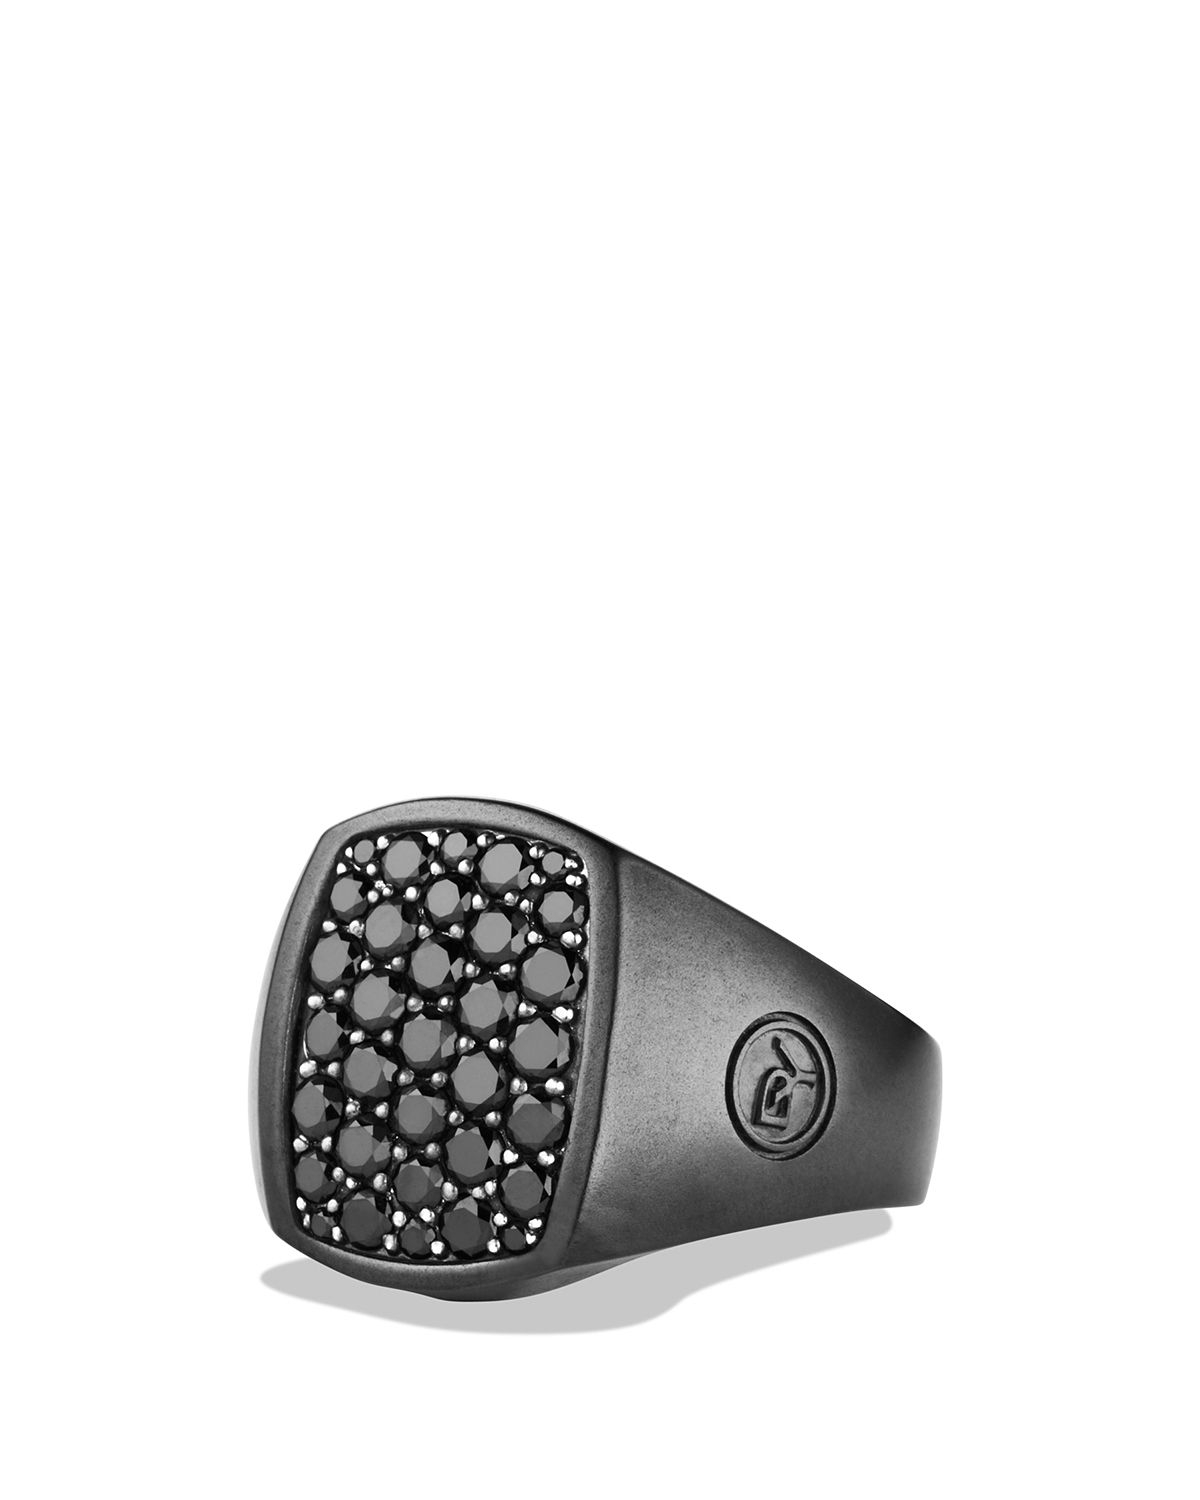 PAMTIER Men's Stainless Steel Vintage Silver Black Pinky Ring Wedding Band  Dragon Flame Pattern Size 7|Amazon.com